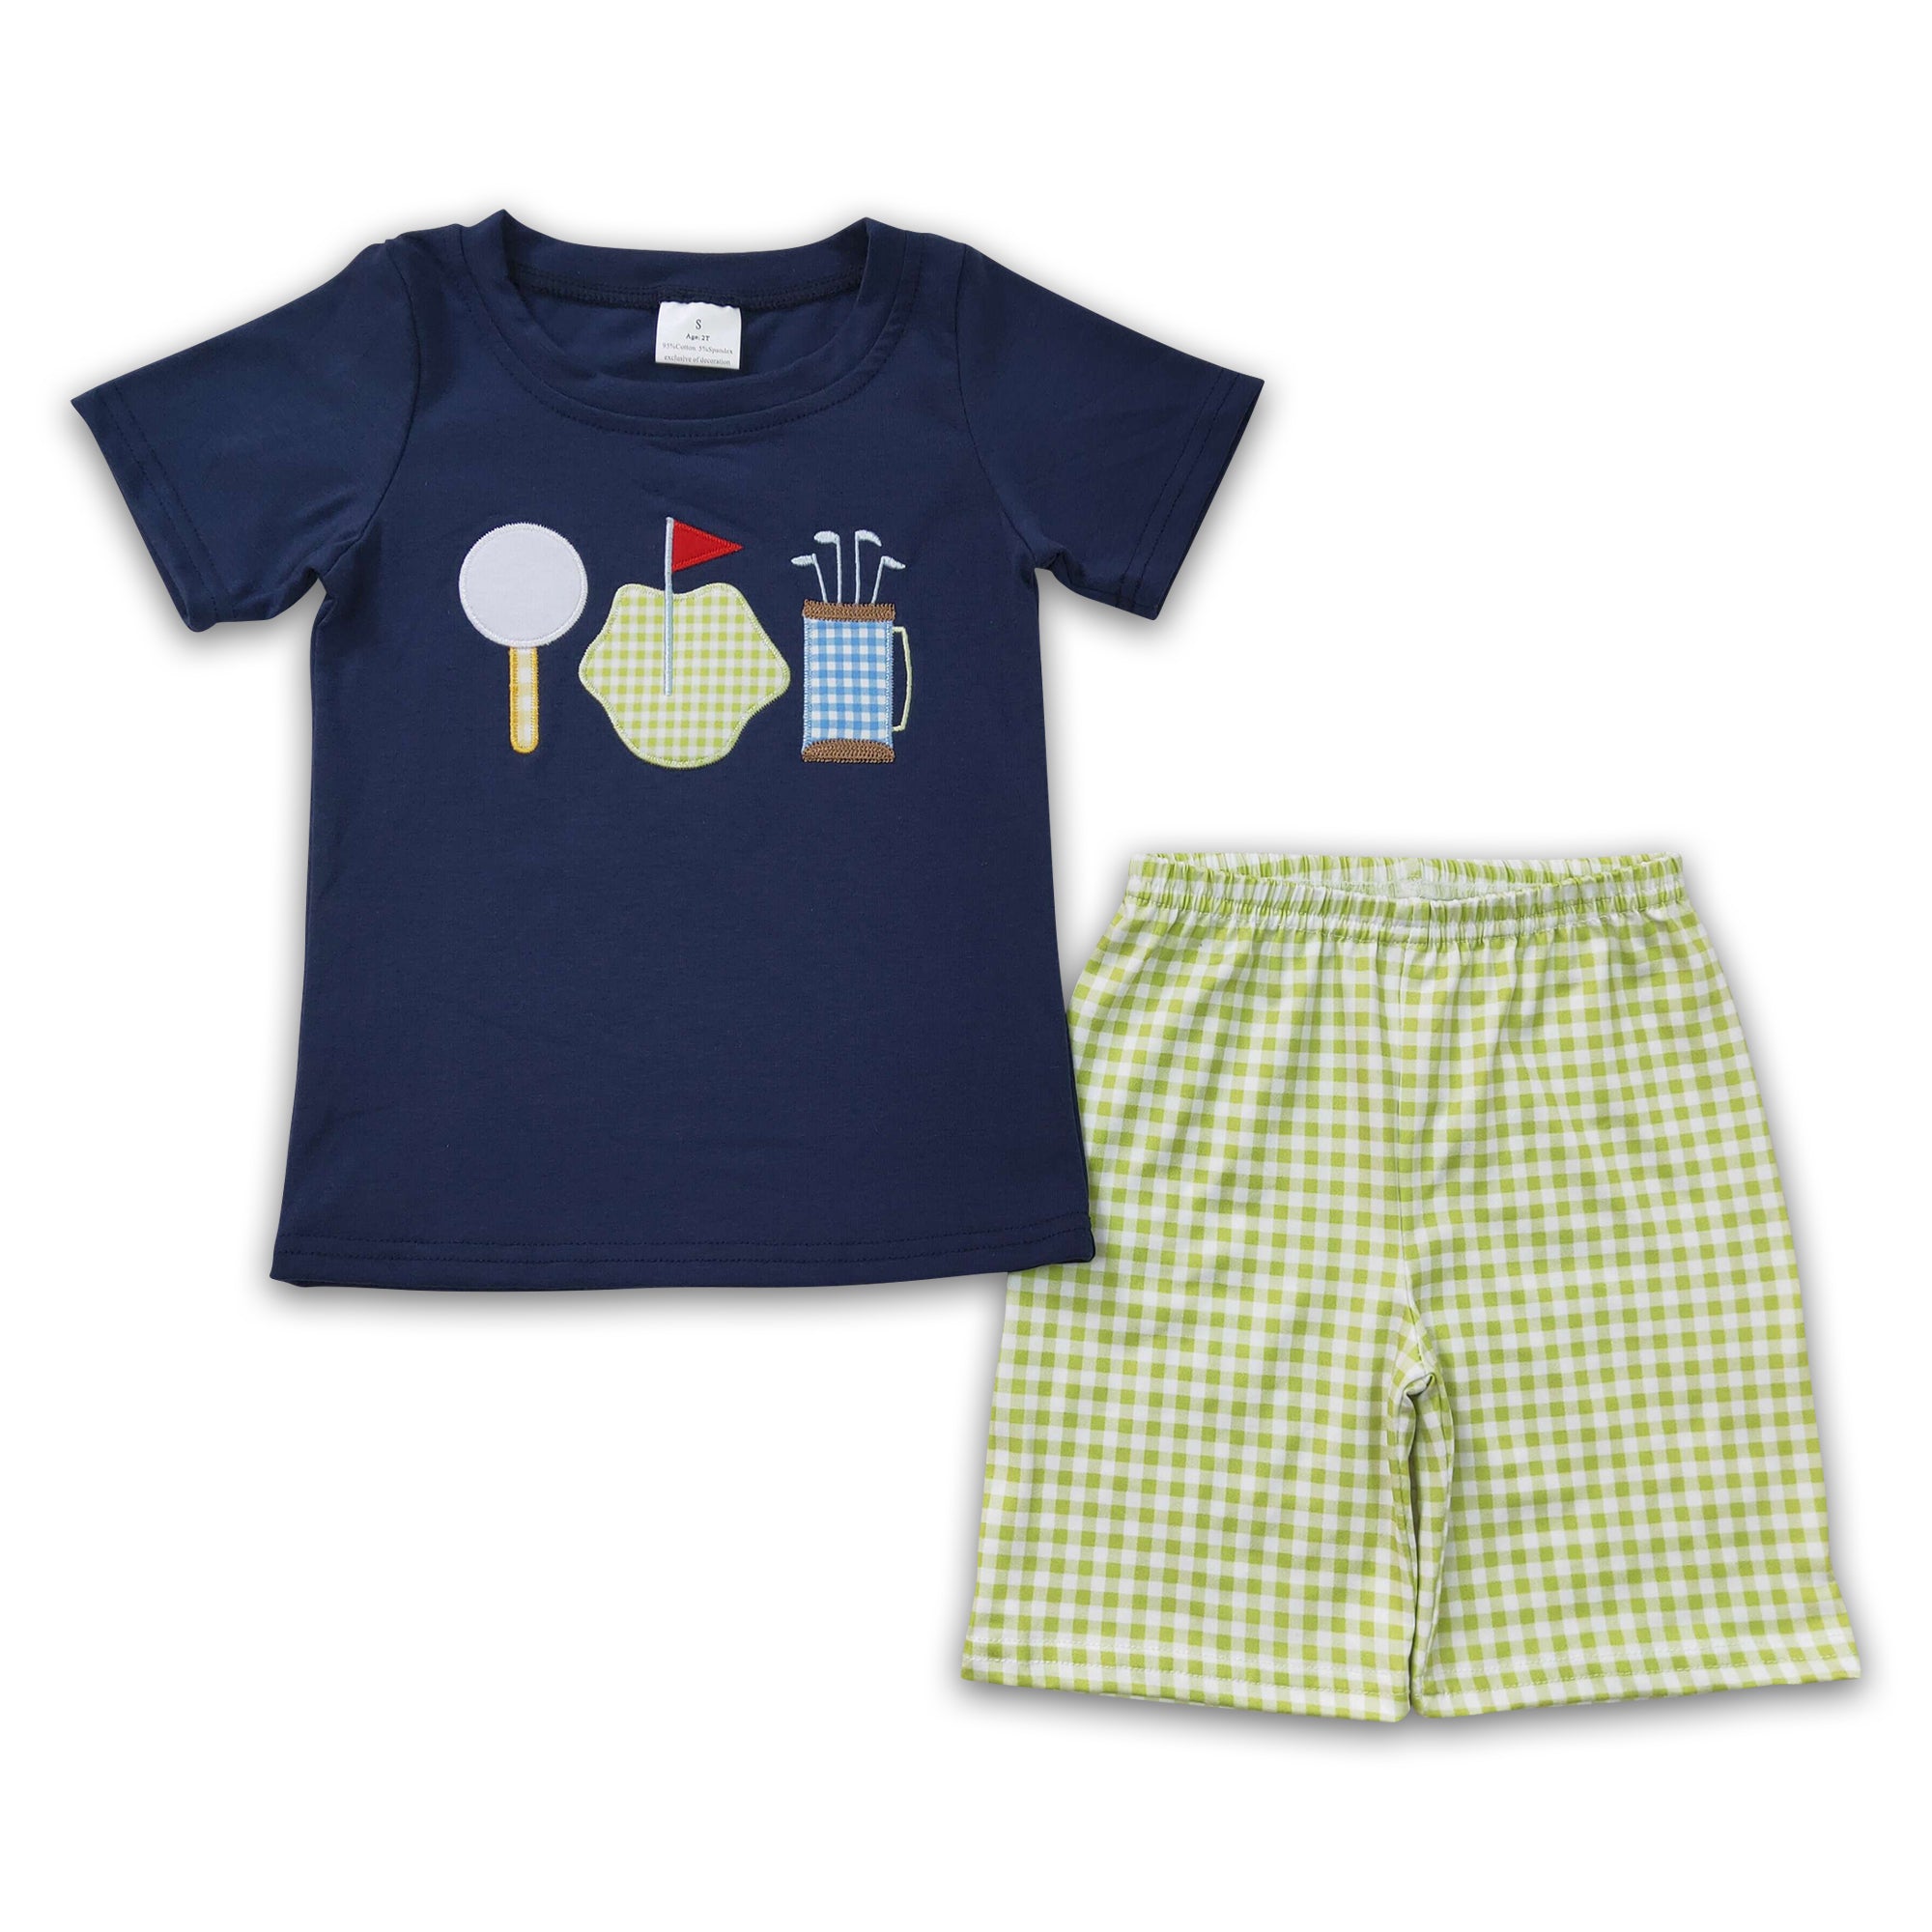 BSSO0135 kids clothes boys embroidery summer outfits